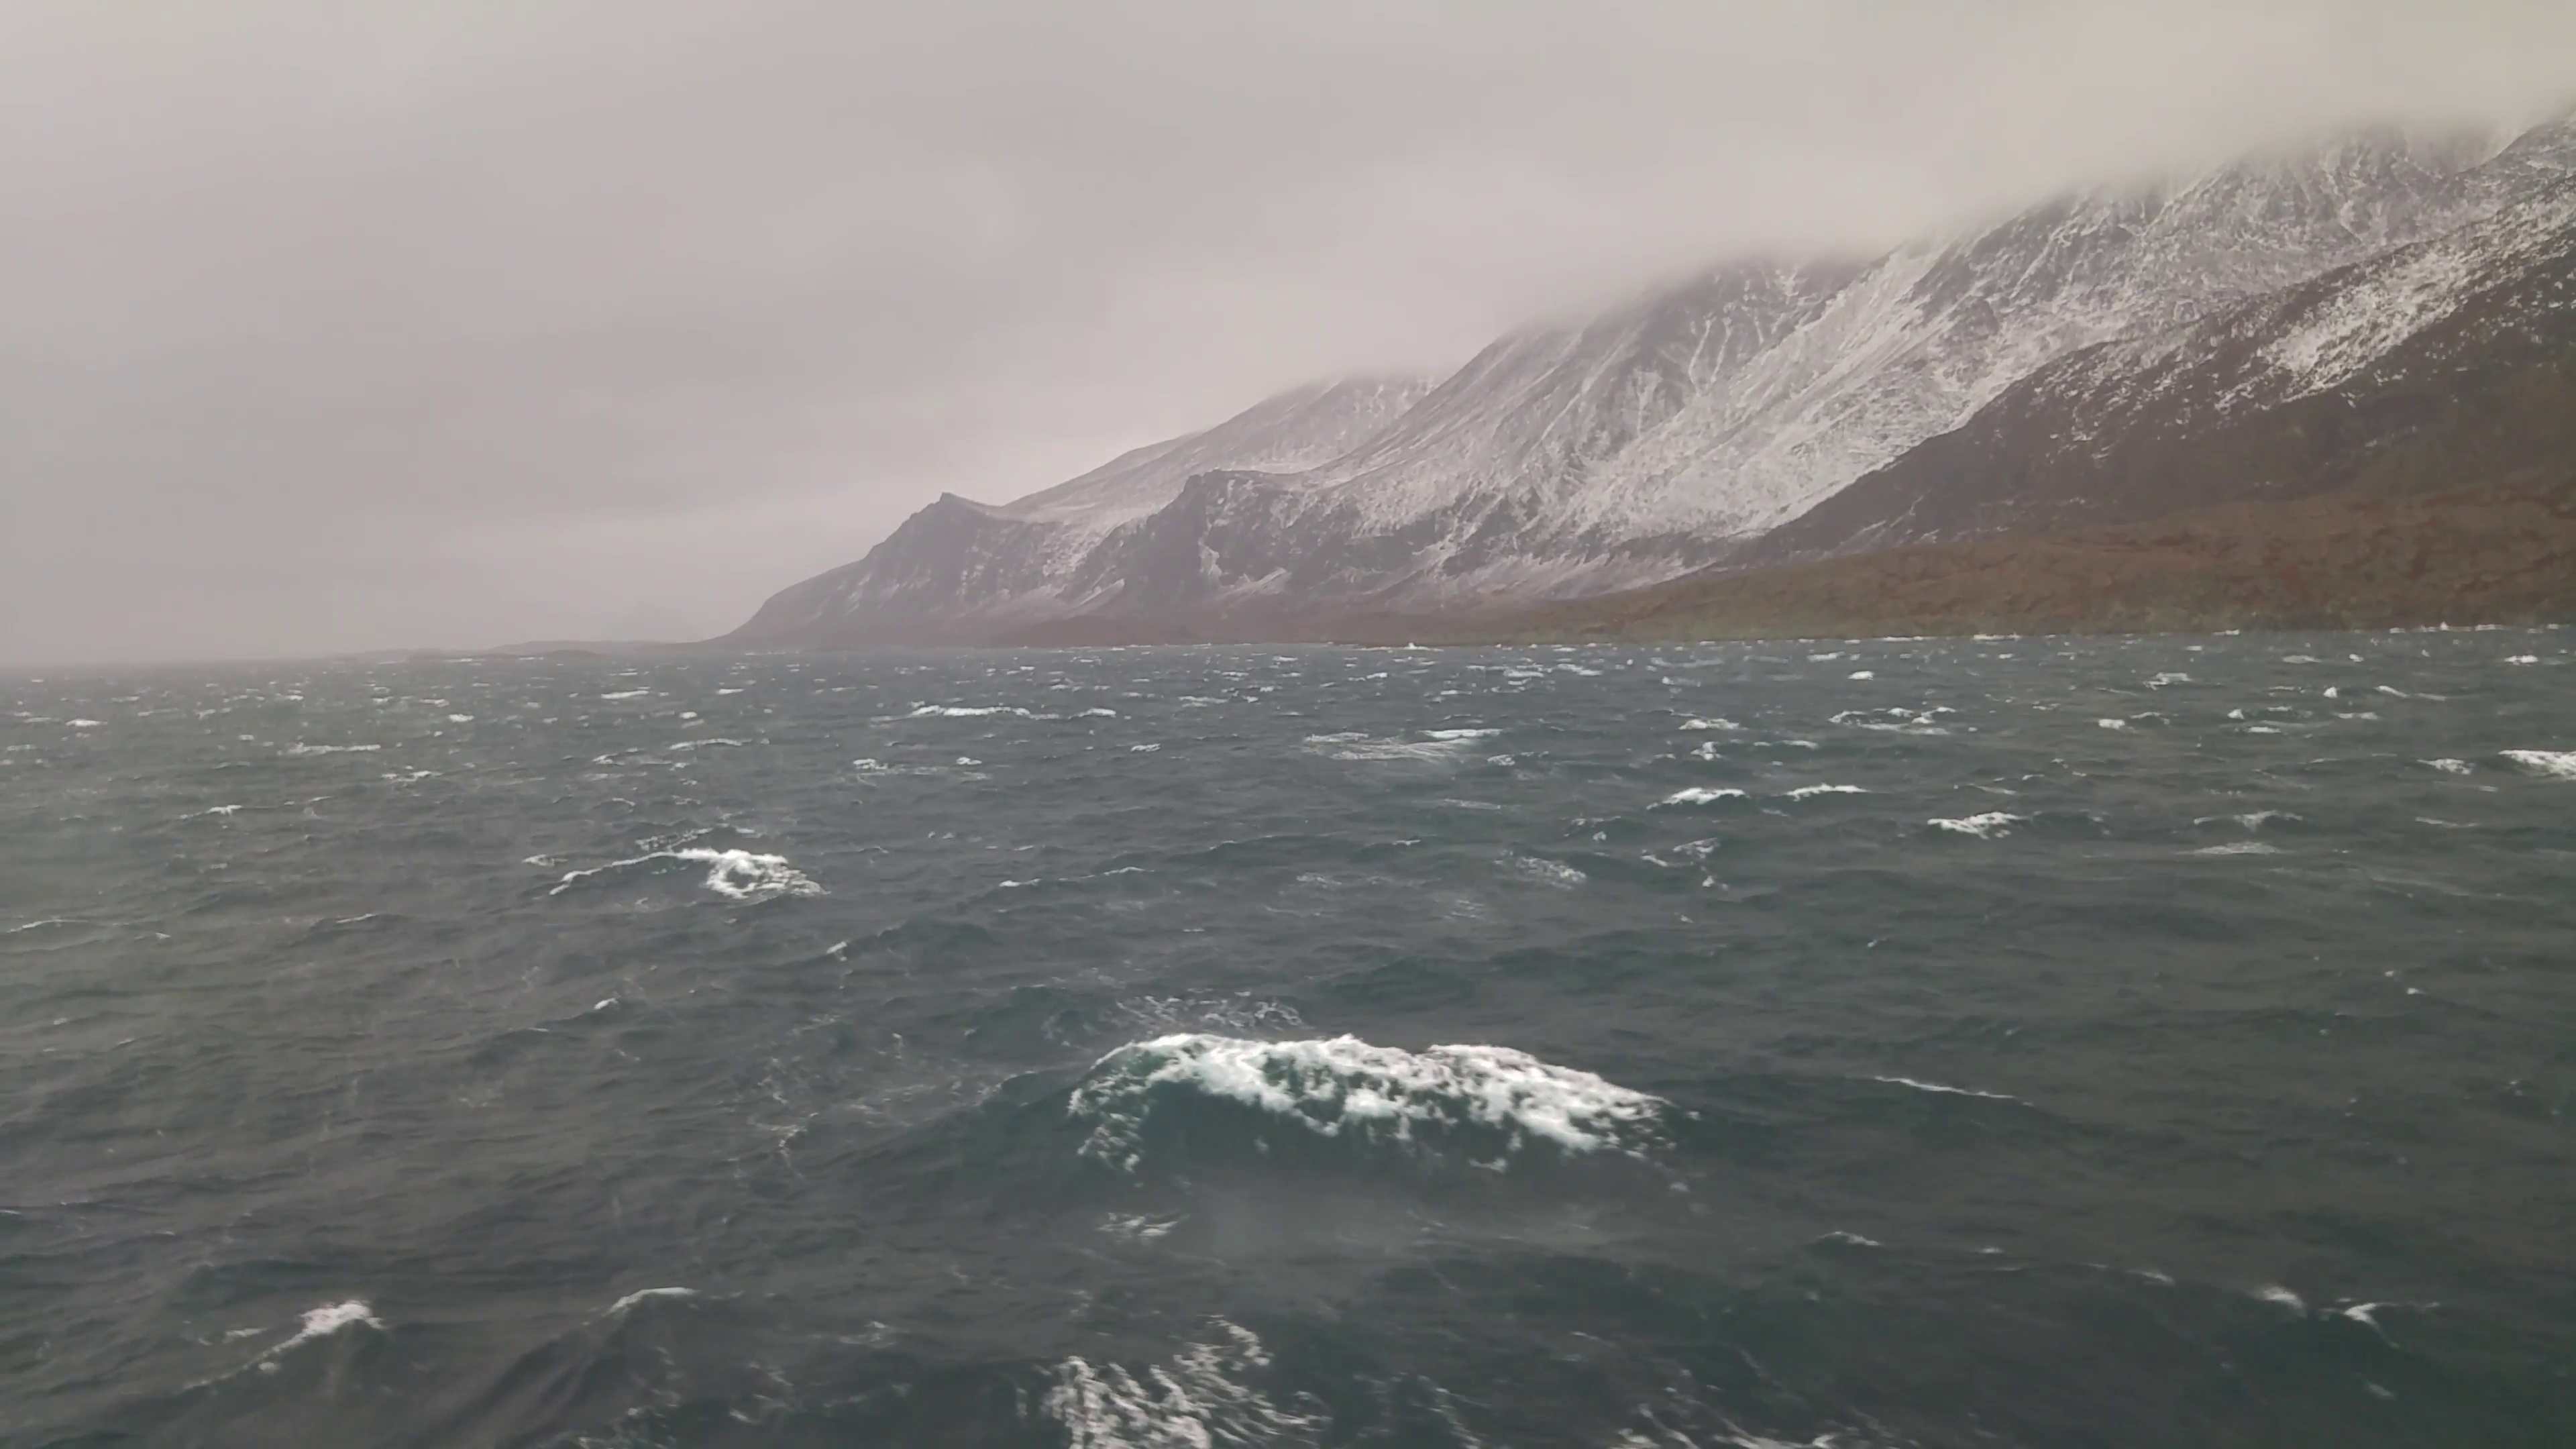 Tempest in the ocean near snowy mountains in Greenland view from a ...